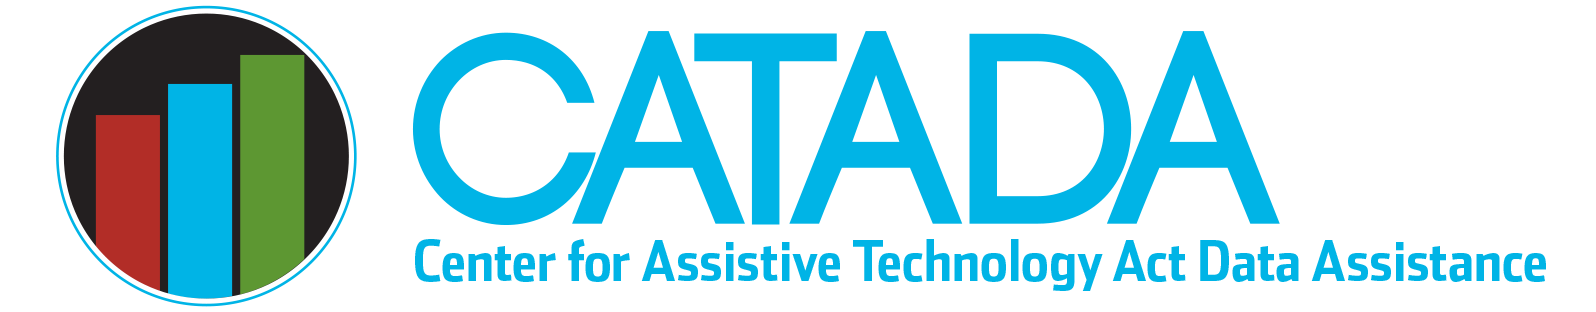 Center for Assistive Technology Act Data Assistance logo